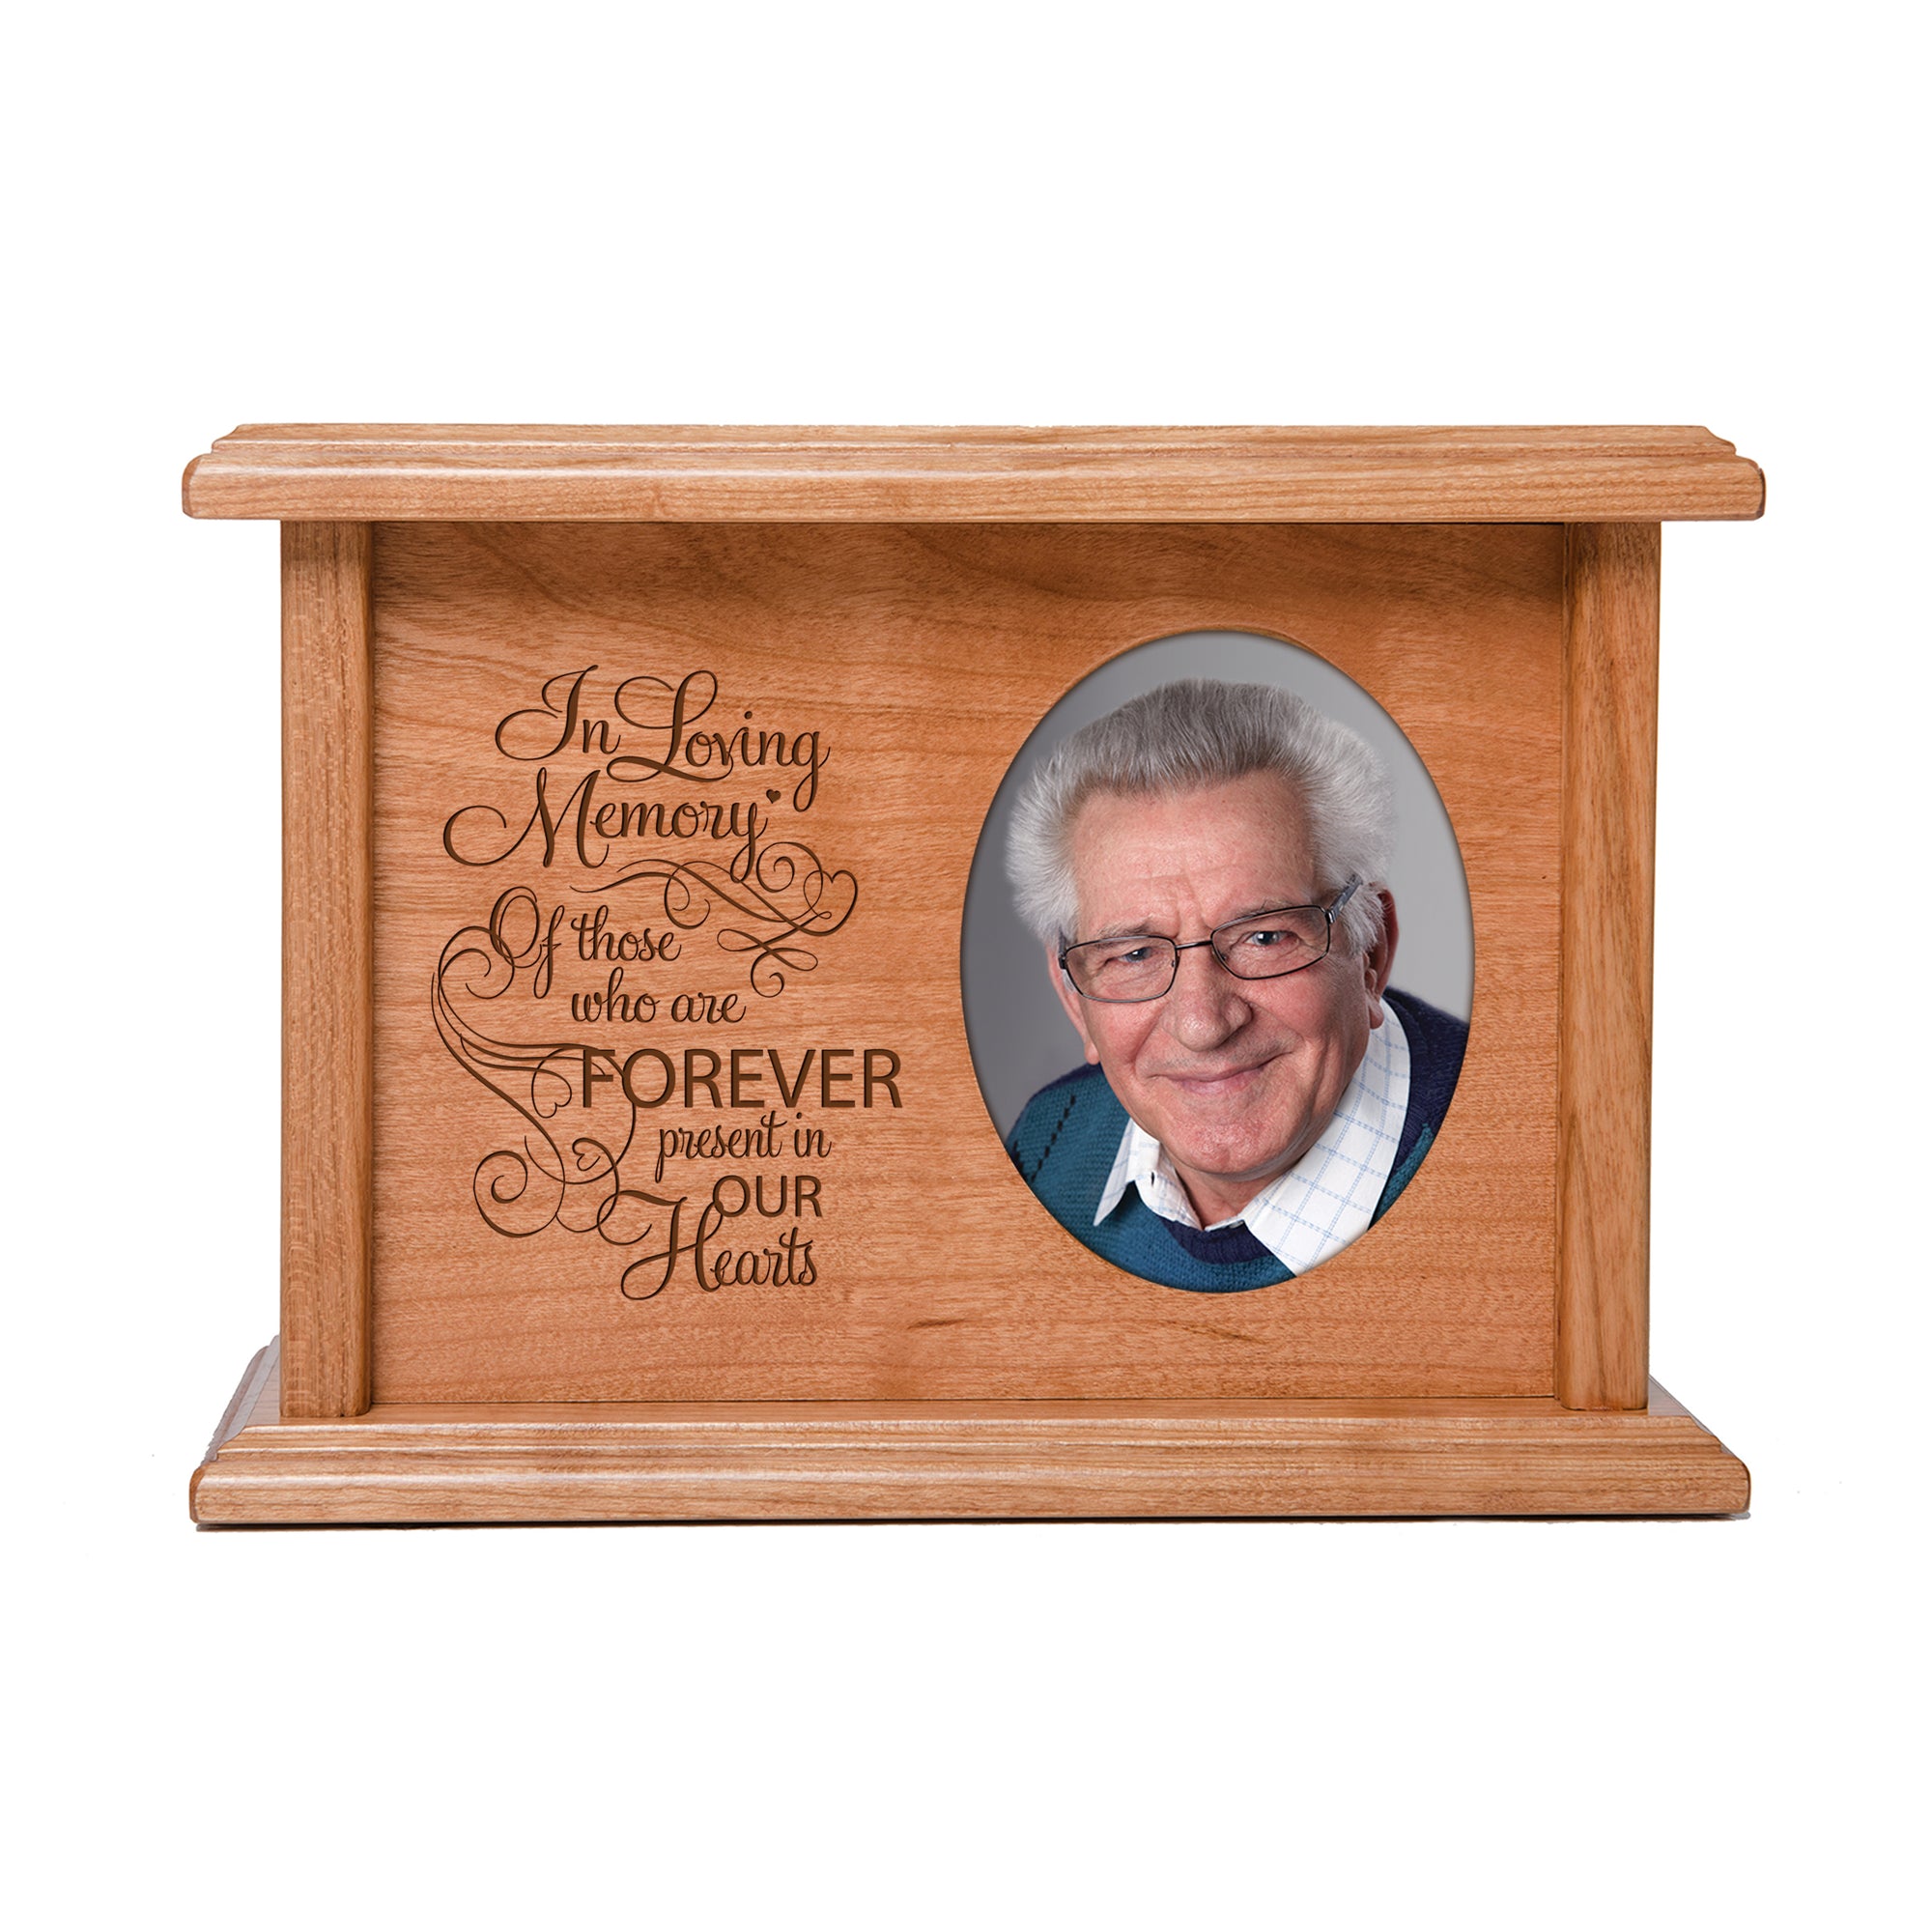 LifeSong Milestones Personalized Horizontal Cherry Wooden Photo Urn for Human Ashes Urn Keepsake Box -  8.75” x 6.25” x 4” and holds 2x3 photo - 65 cubic inches of ashes -  In Loving Memory